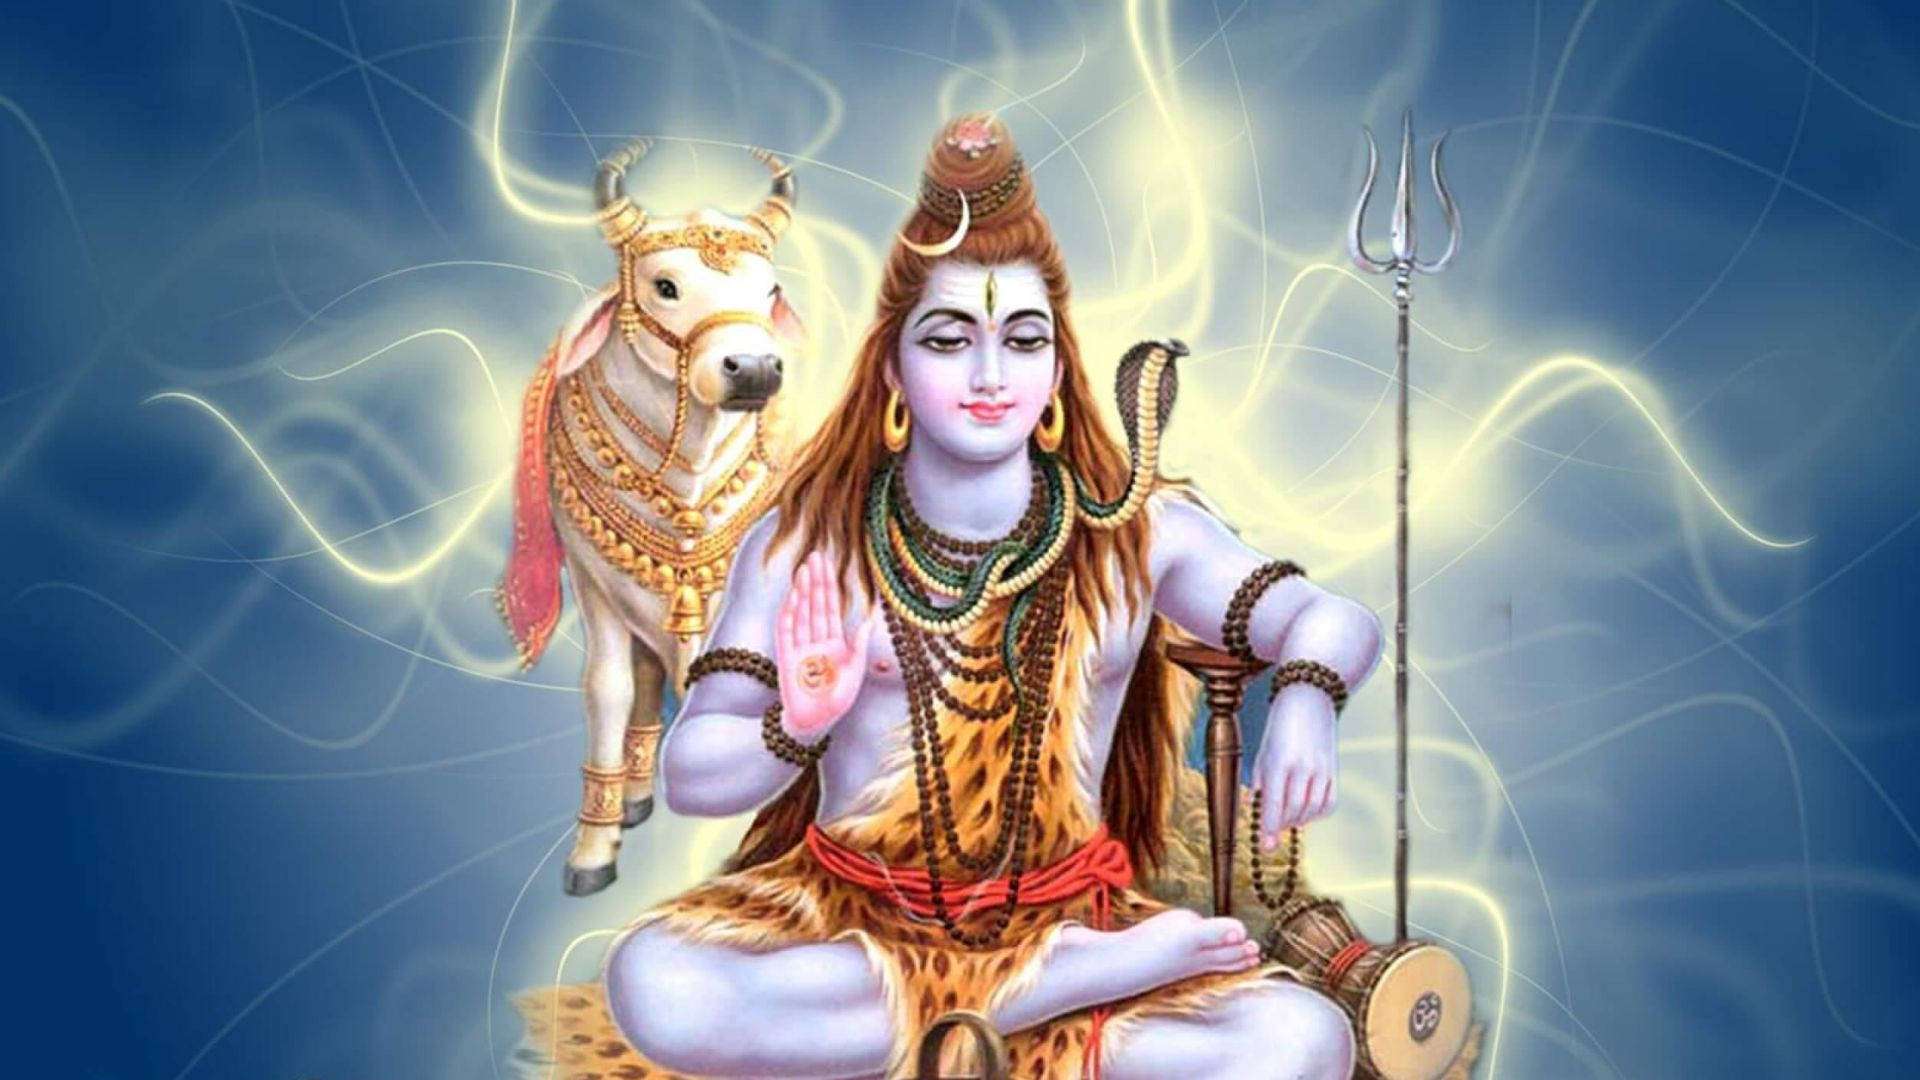 Download Lord Shiva Hd With Cow Wallpaper 